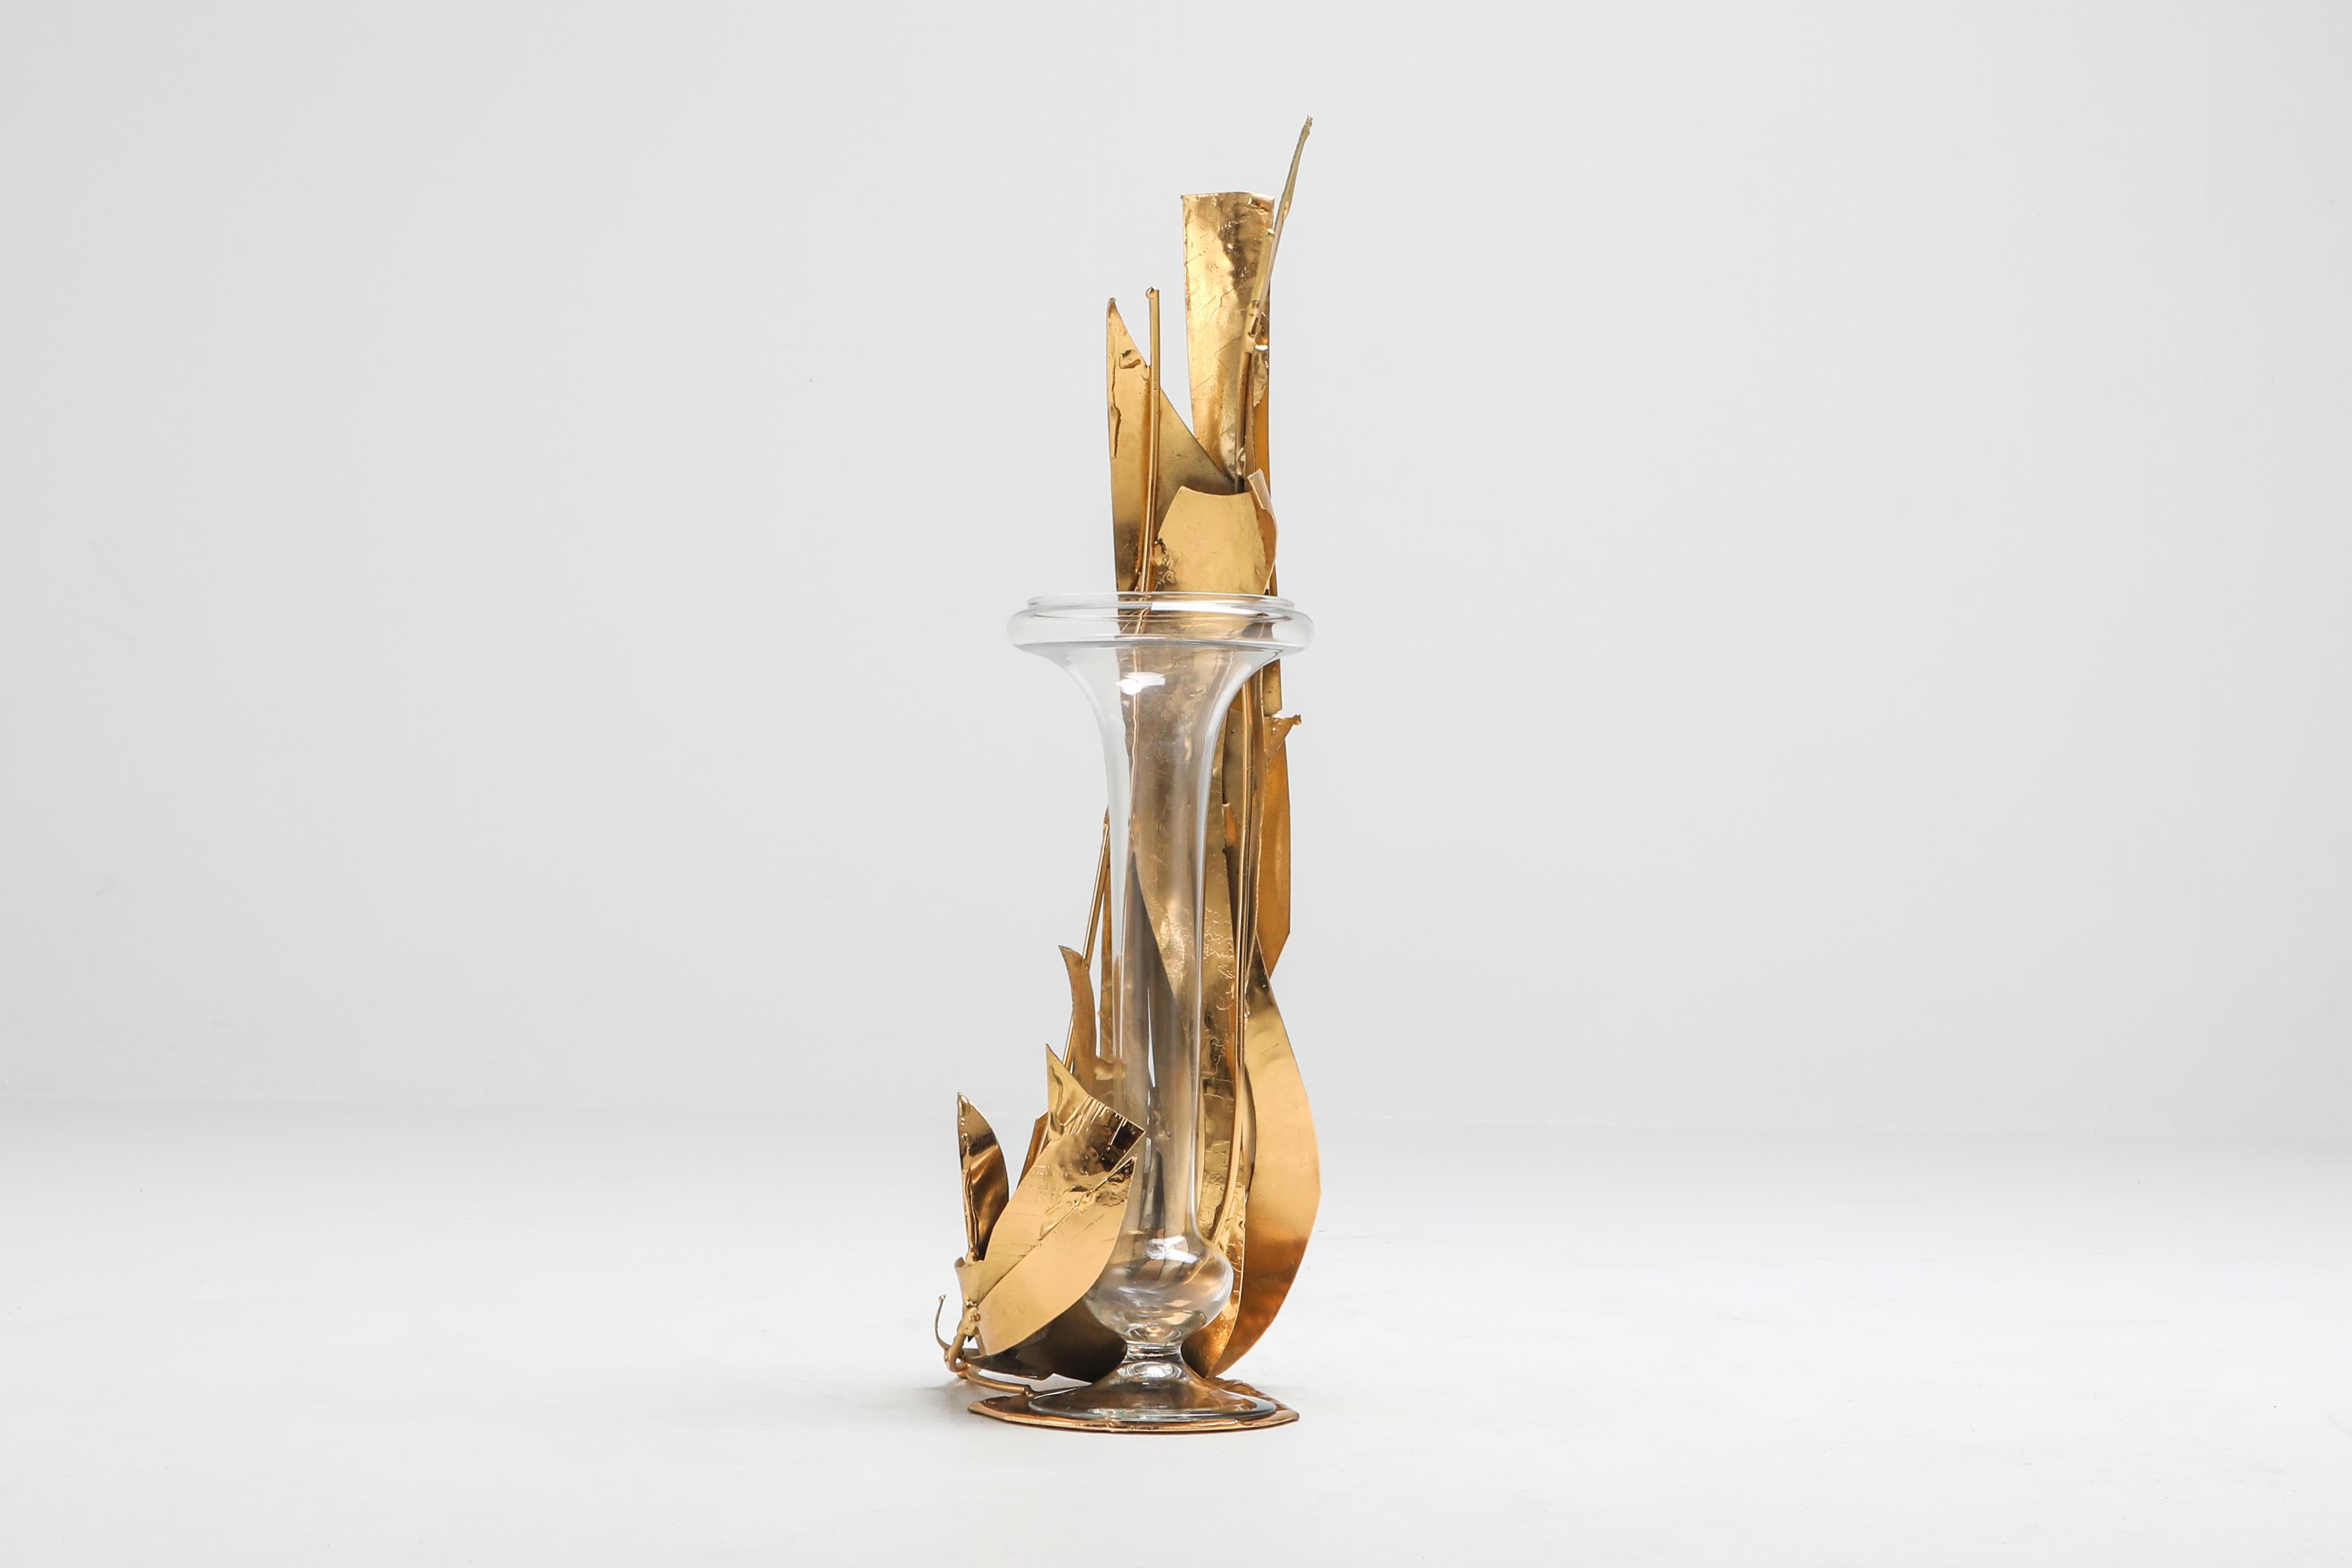 European Crystal and Brass Vase by Marc D'Haenens